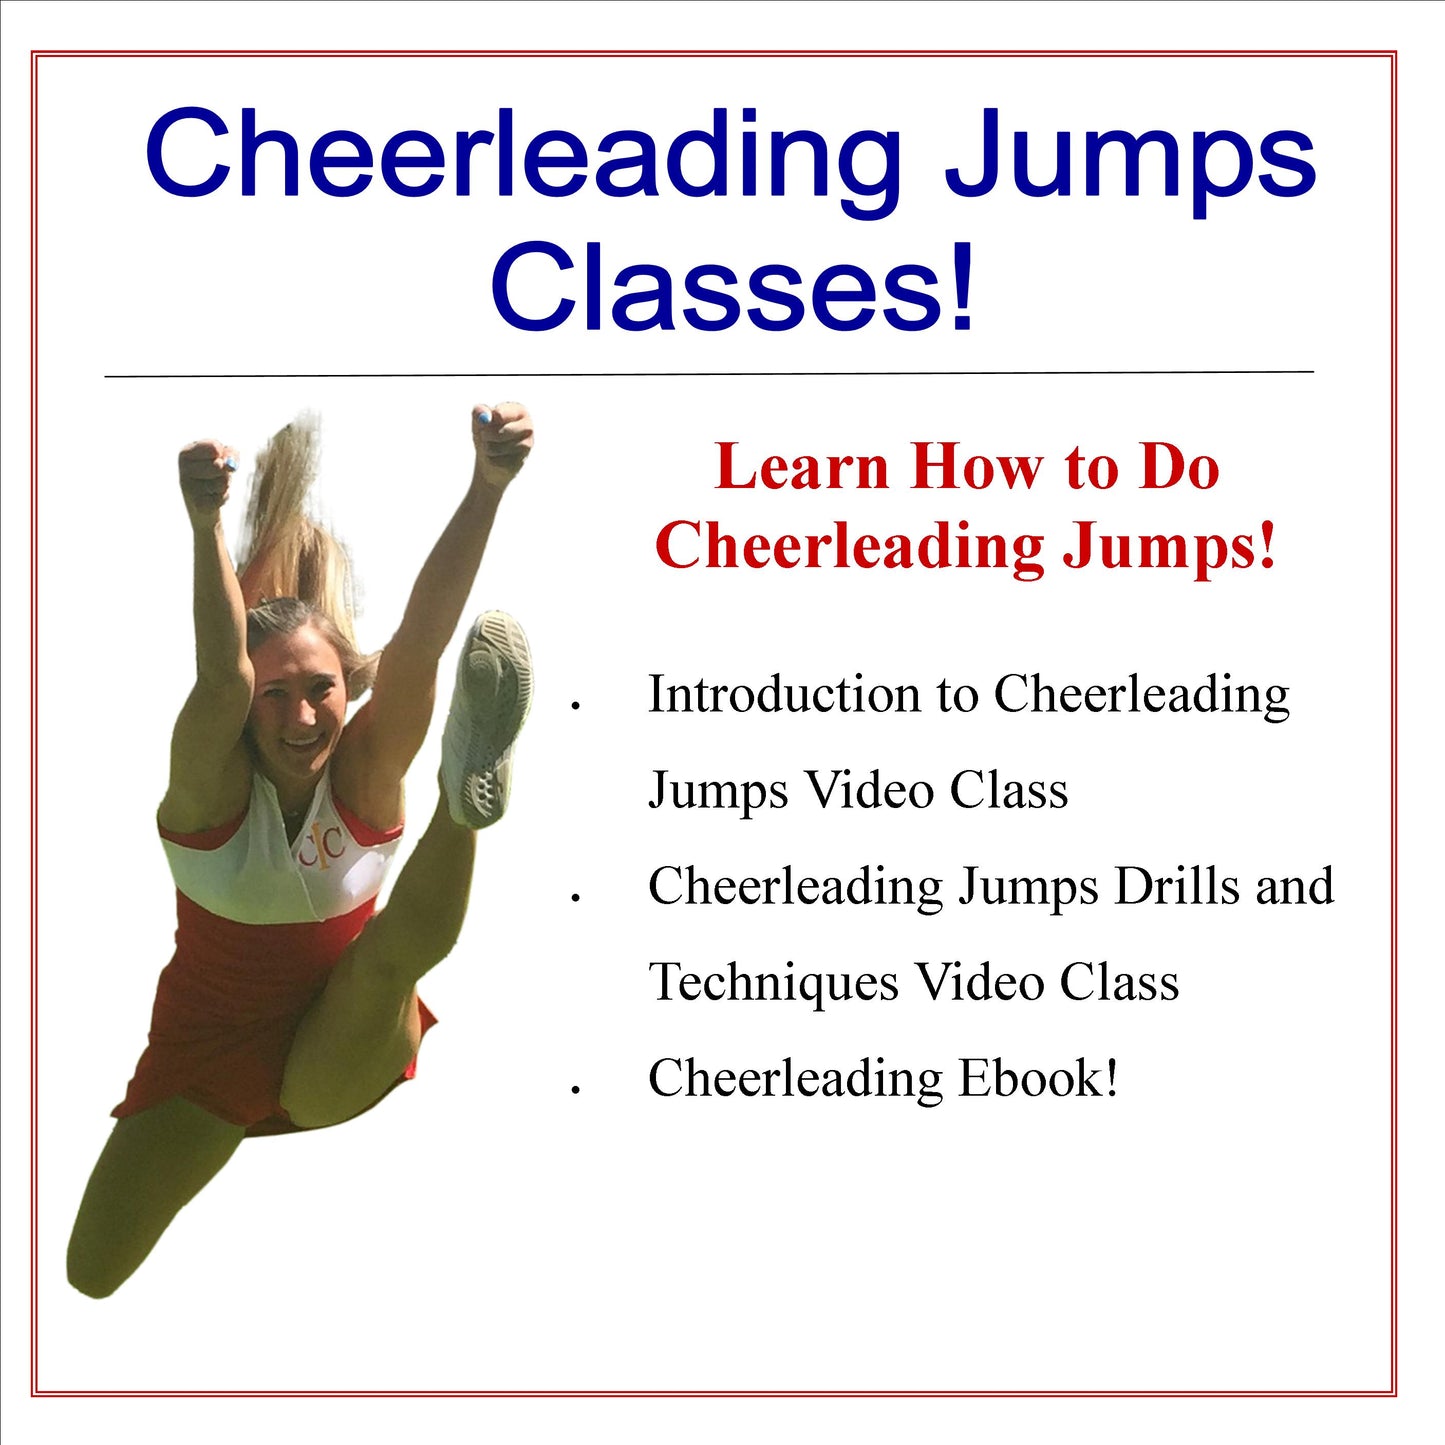 How to Do Cheerleading Jumps - Video Classes - Cheer and Dance On Demand